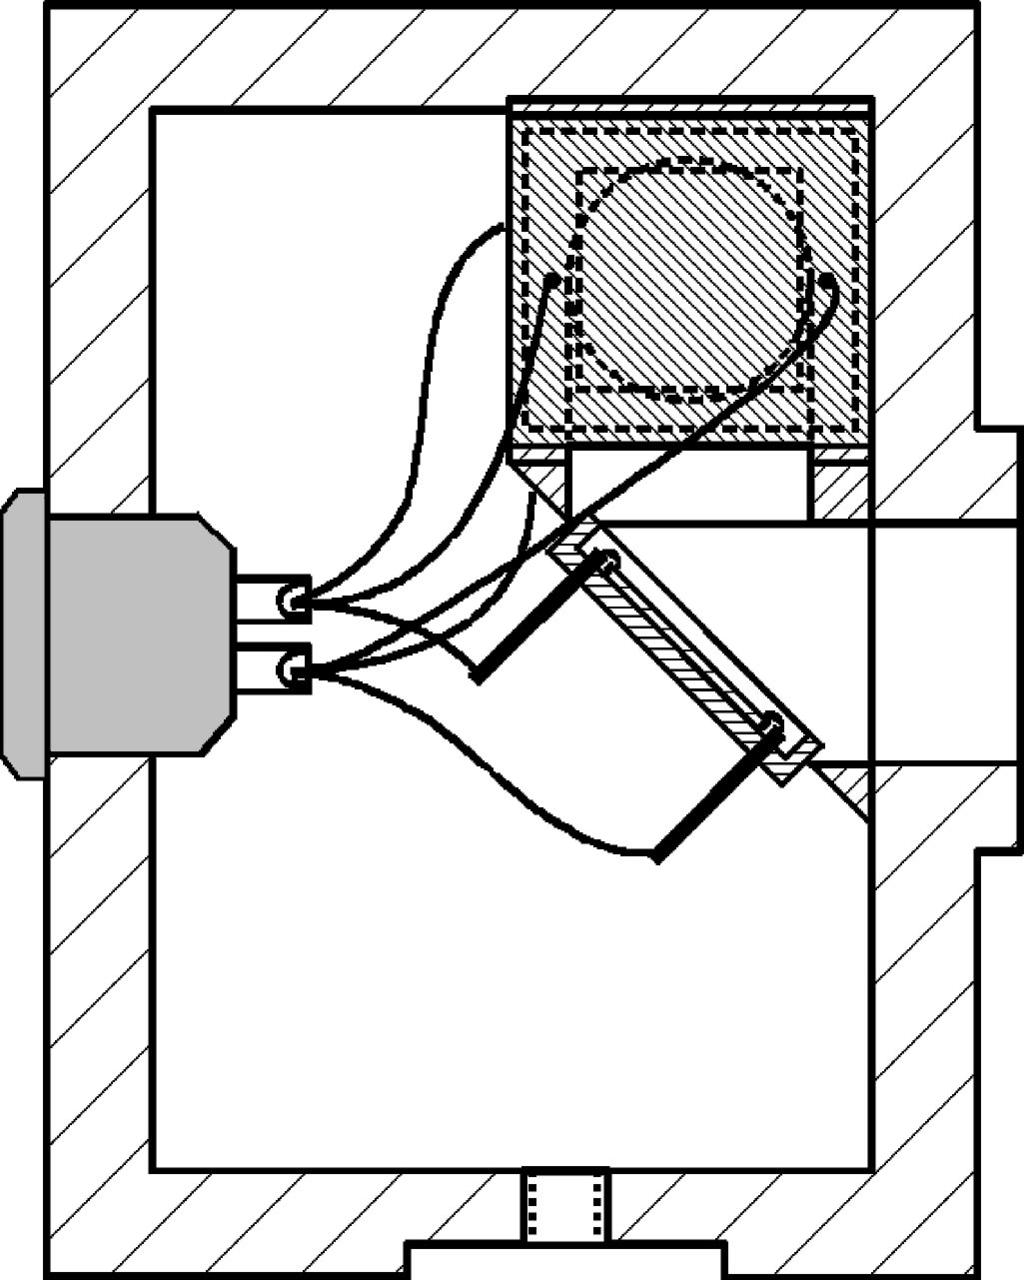 033110-2 Noorma et al. Rev. Sci. Instrum. 76, 033110 2005 FIG. 1. Schematic drawing of GaAsP trap detector. The third diode is located behind the body part keeping the diodes together.